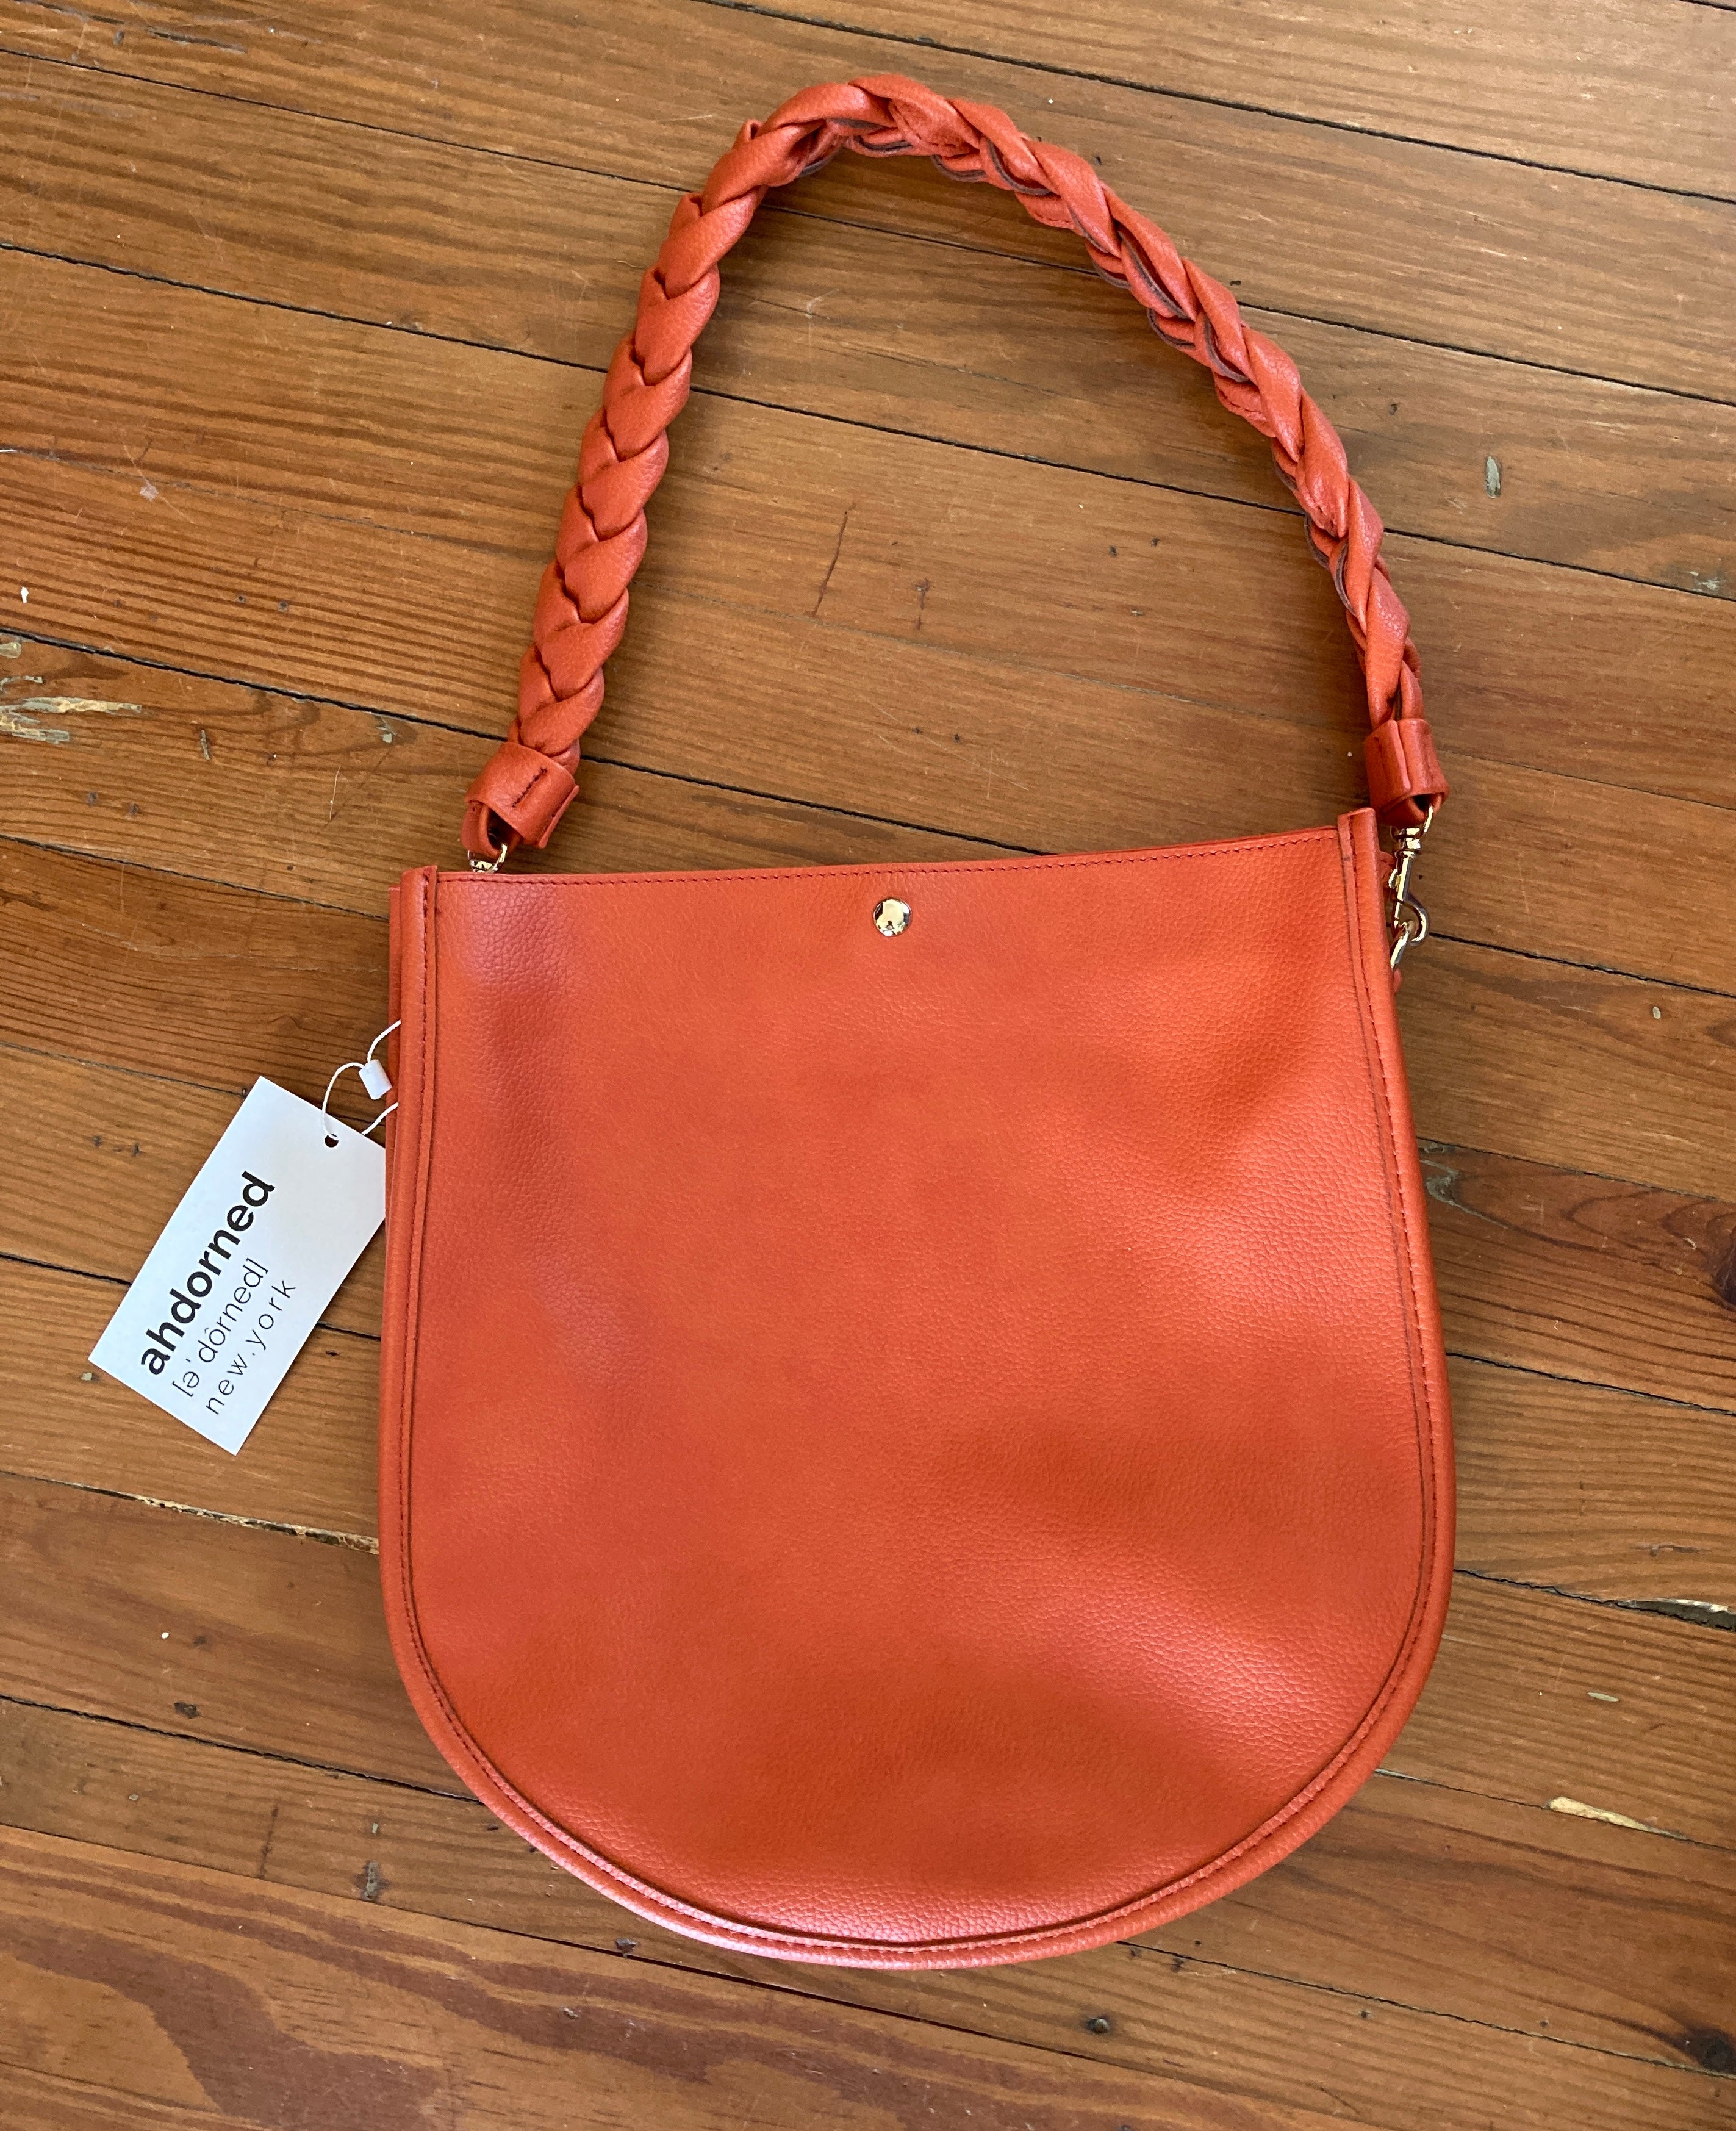 Italian Leather Crossbody Tote with Wool Felt and Zip - Orange and